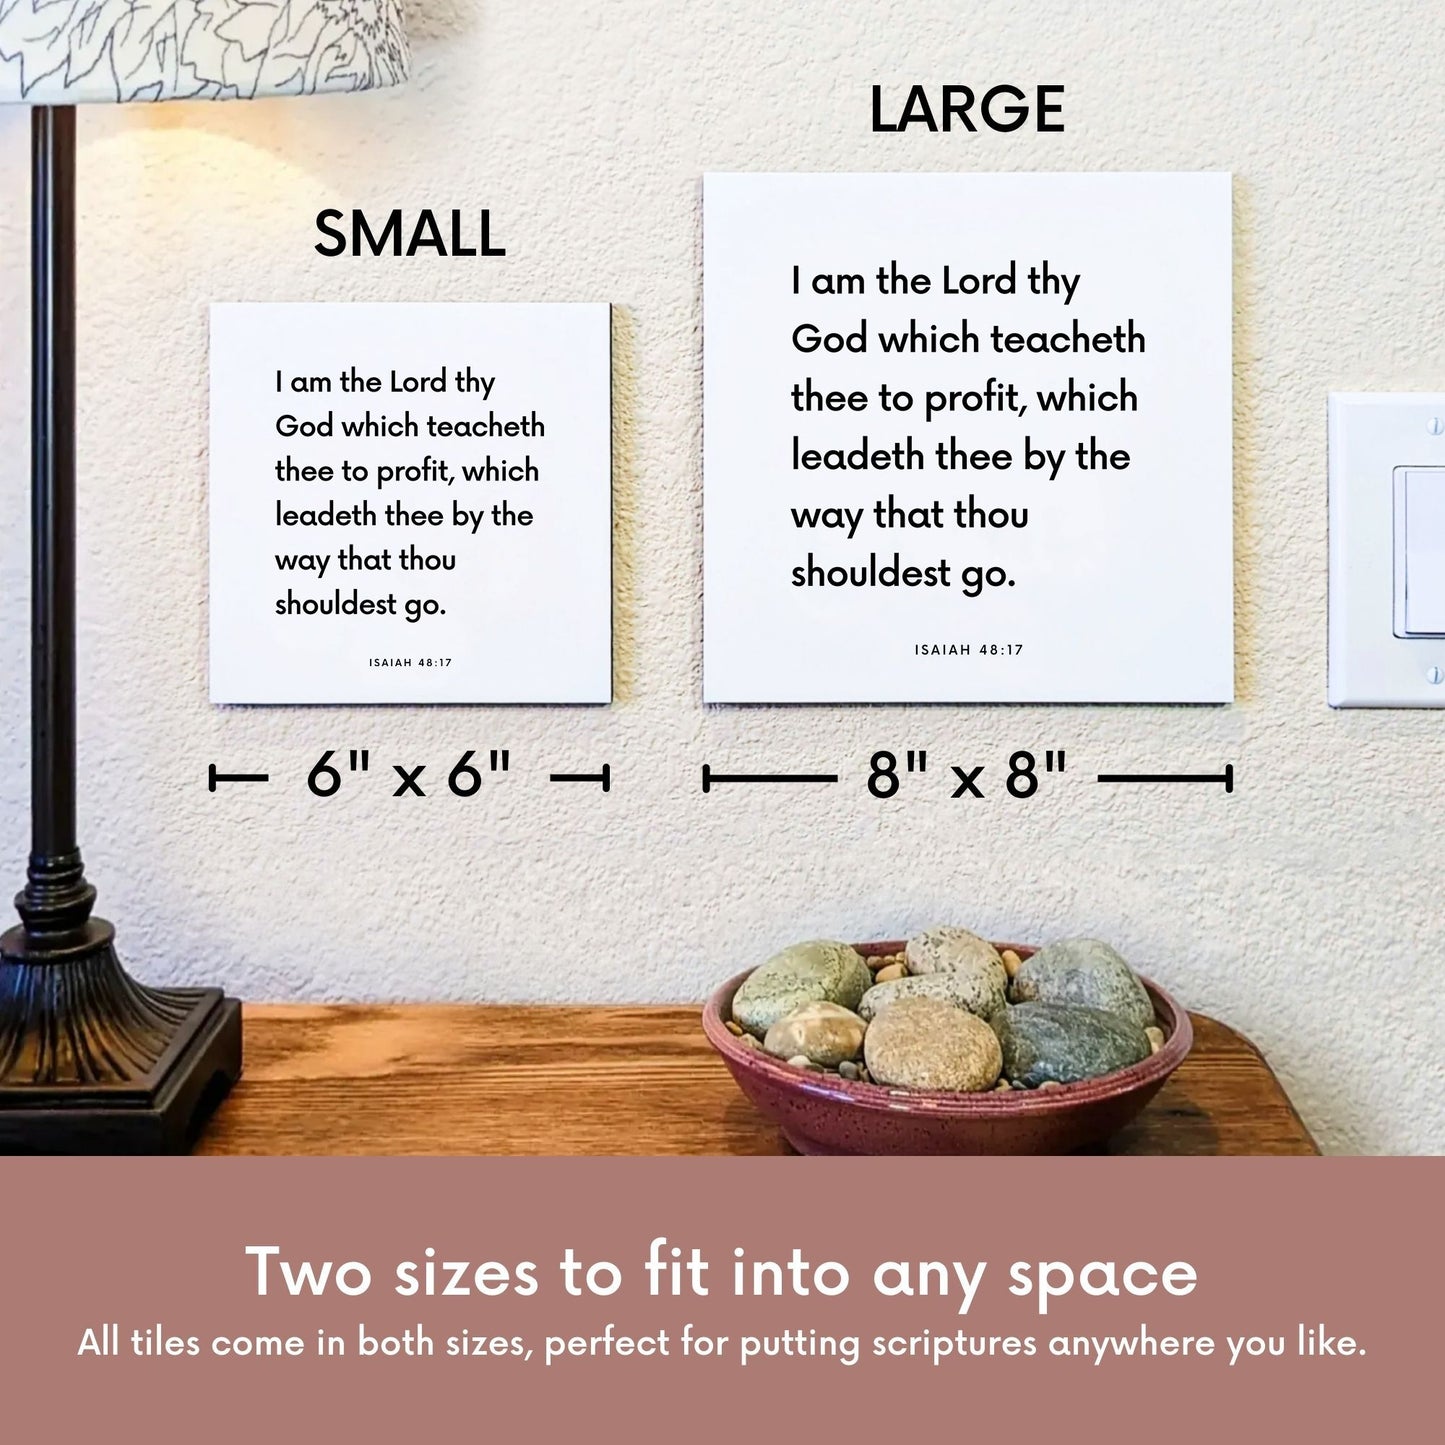 Scripture tile size comparison for Isaiah 48:17 - "I am the Lord thy God which teacheth thee to profit"